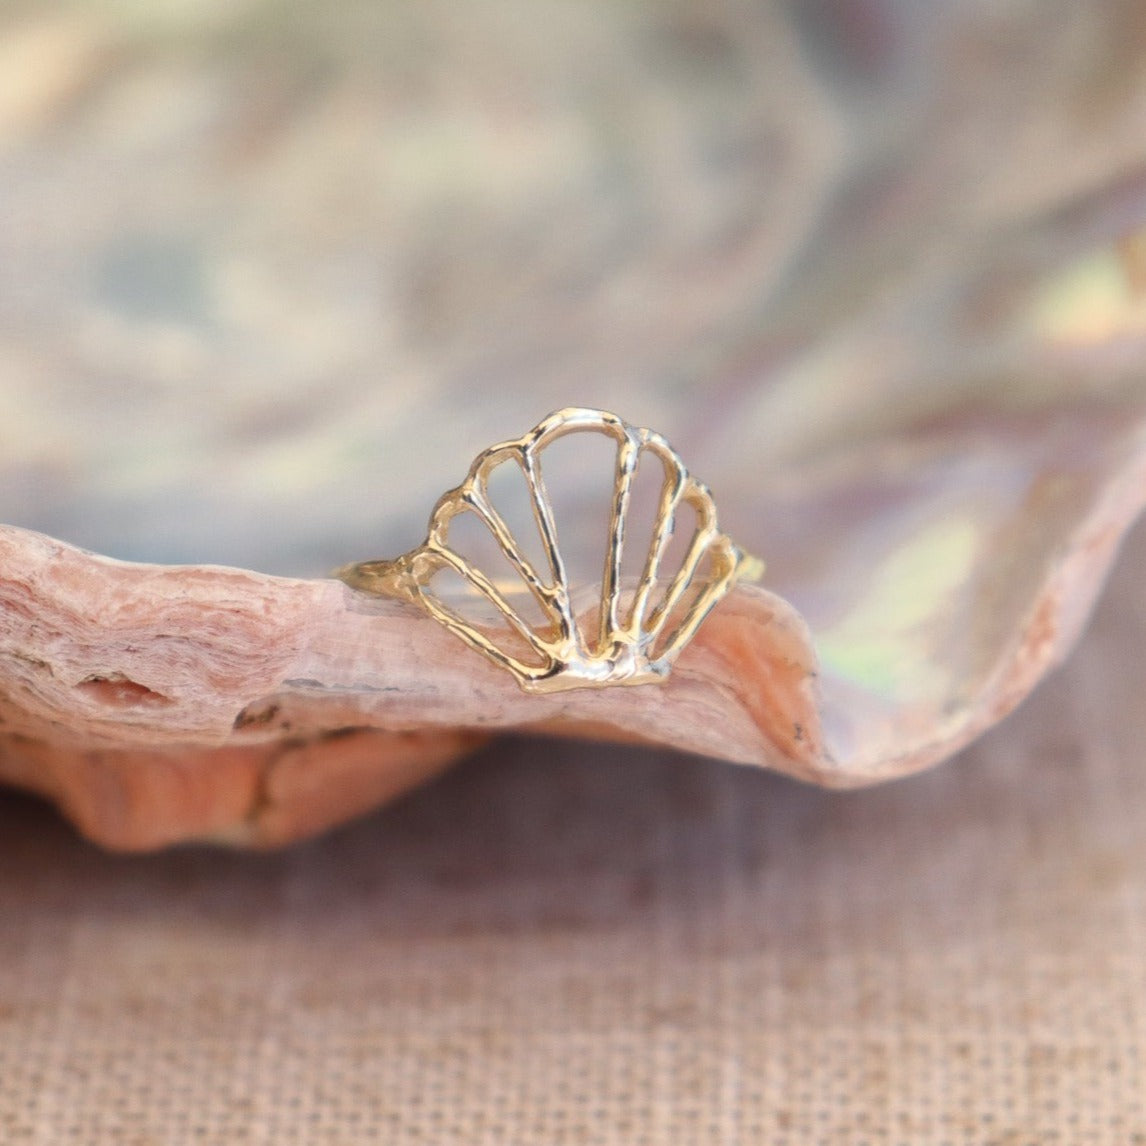 Close-up of an exquisite seashell ring, showcasing intricate details and a natural, shell centerpiece, capturing the essence of coastal beauty and ocean-inspired jewelry design.